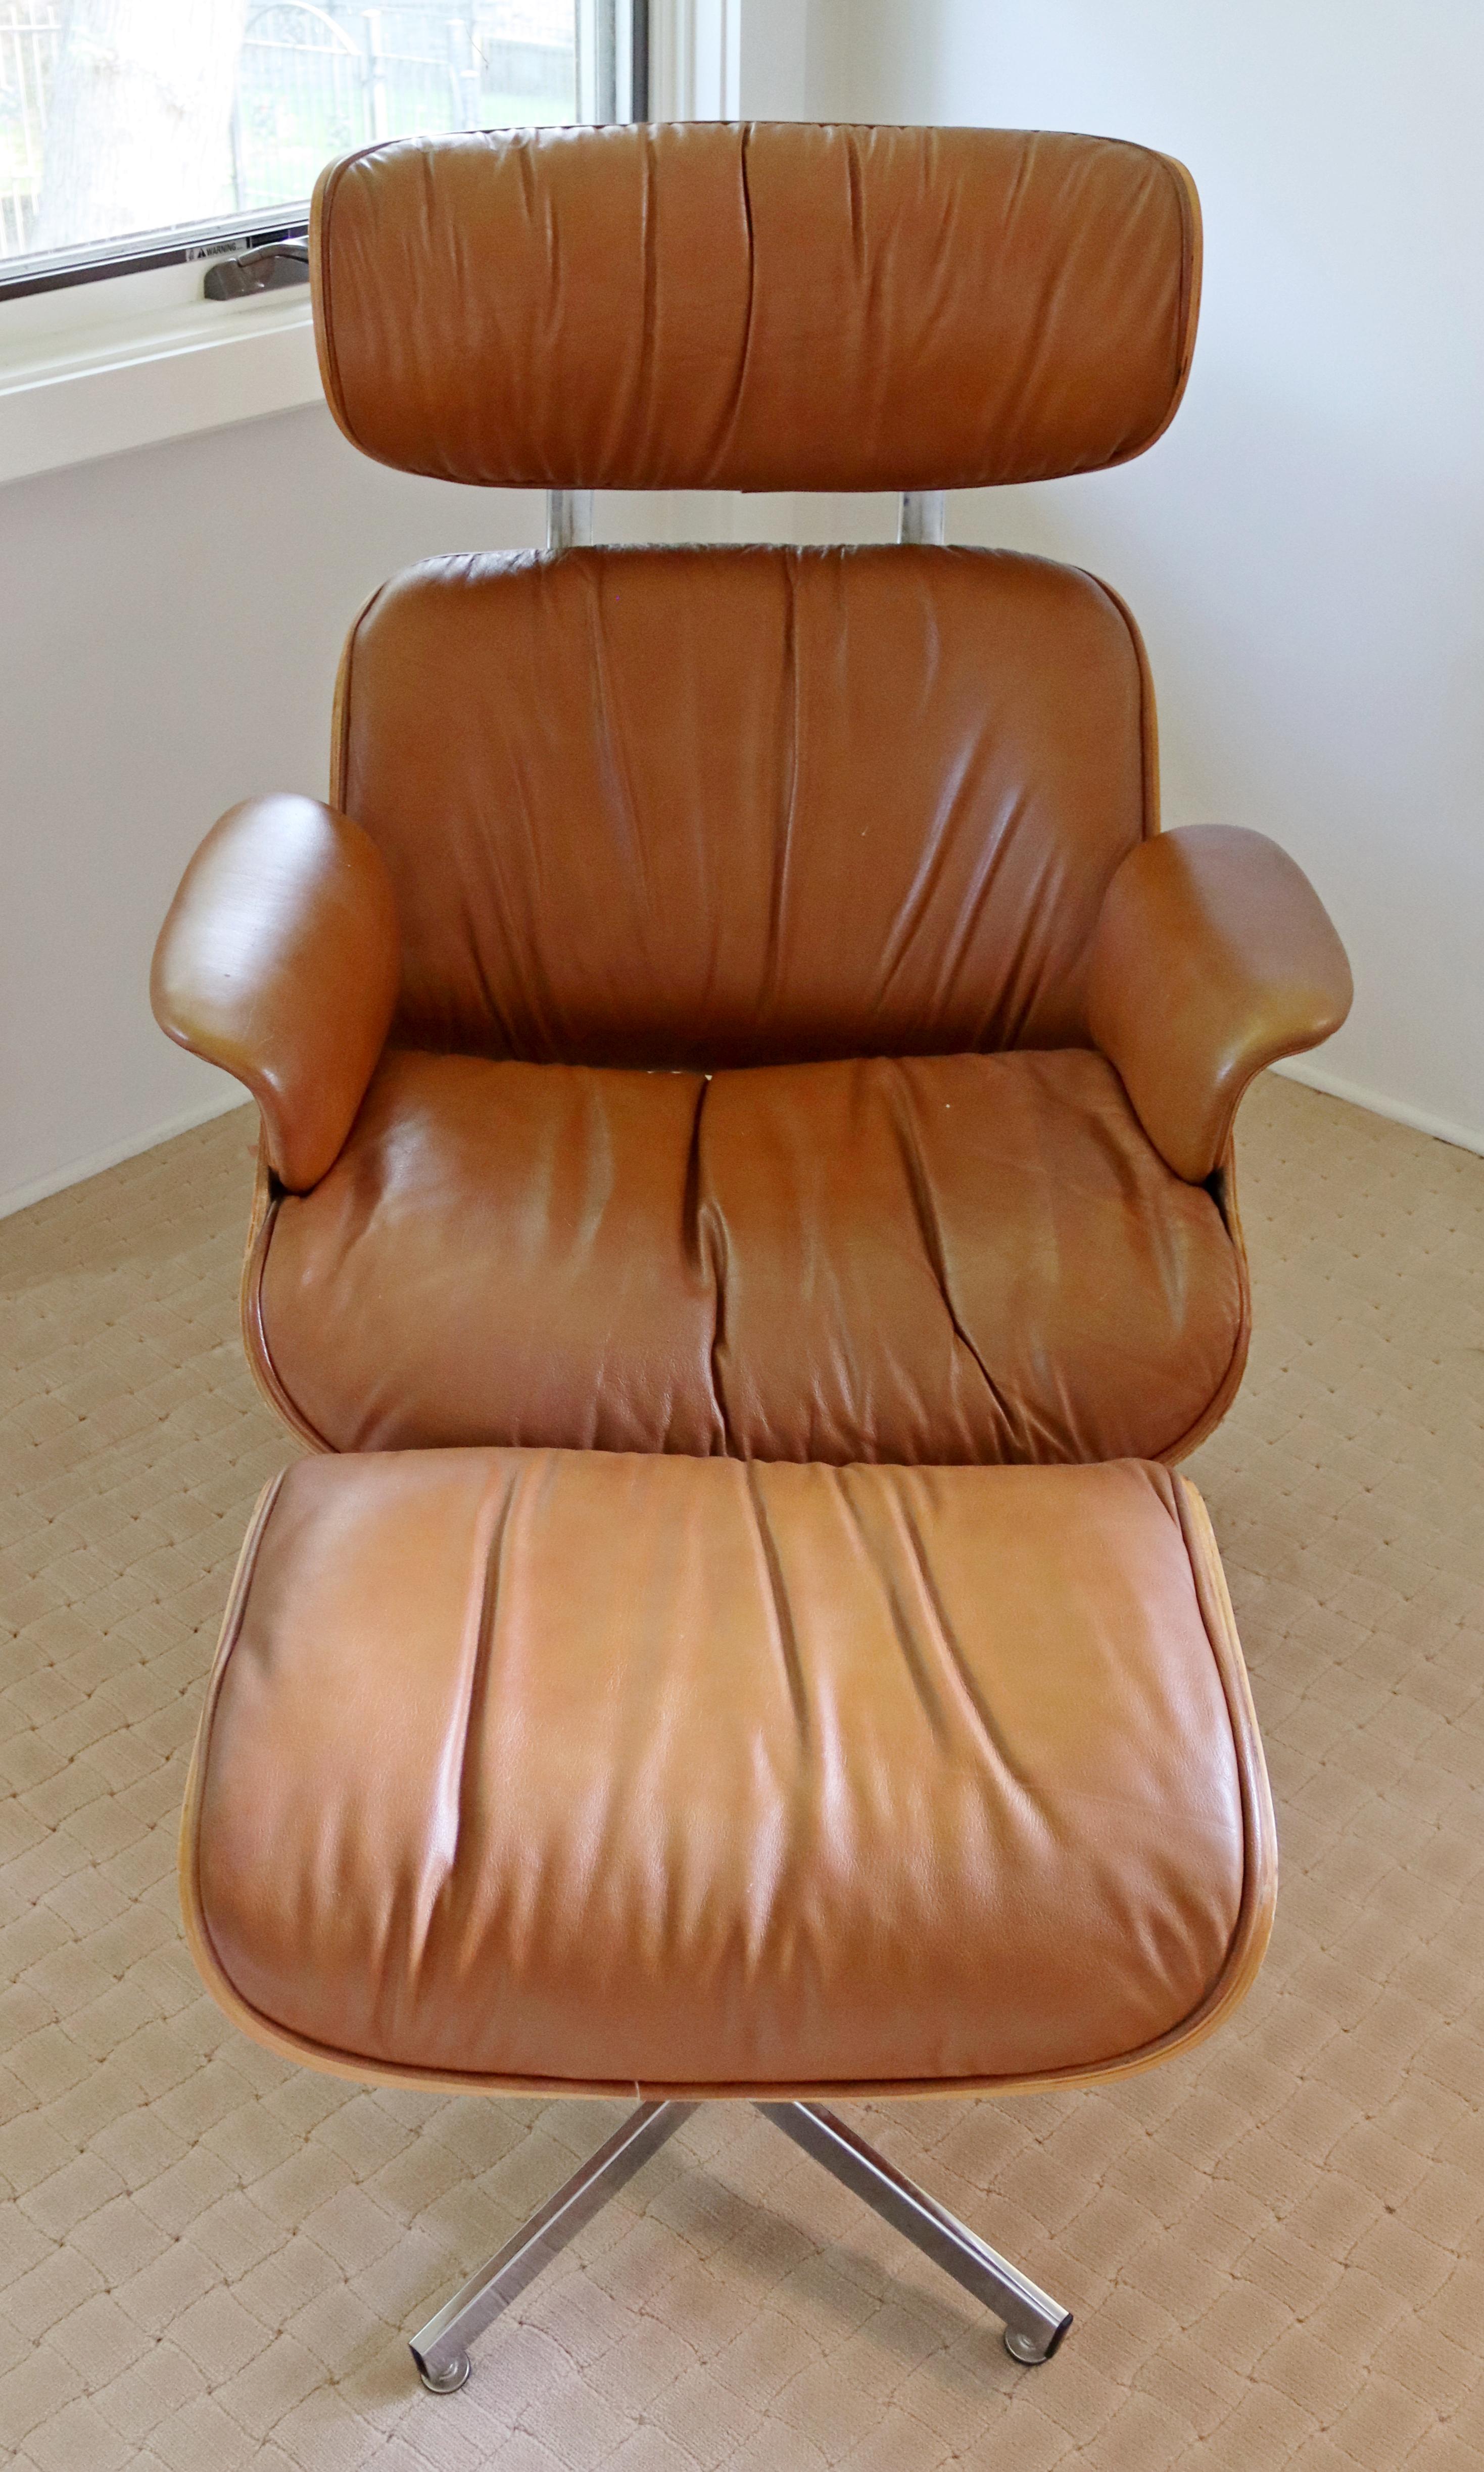 For your consideration is a stupendous lounge chair with matching ottoman, with a brown leather upholstery on a wood base, by Selig, circa the 1970s. In very good vintage condition. The dimensions of the chair are 32